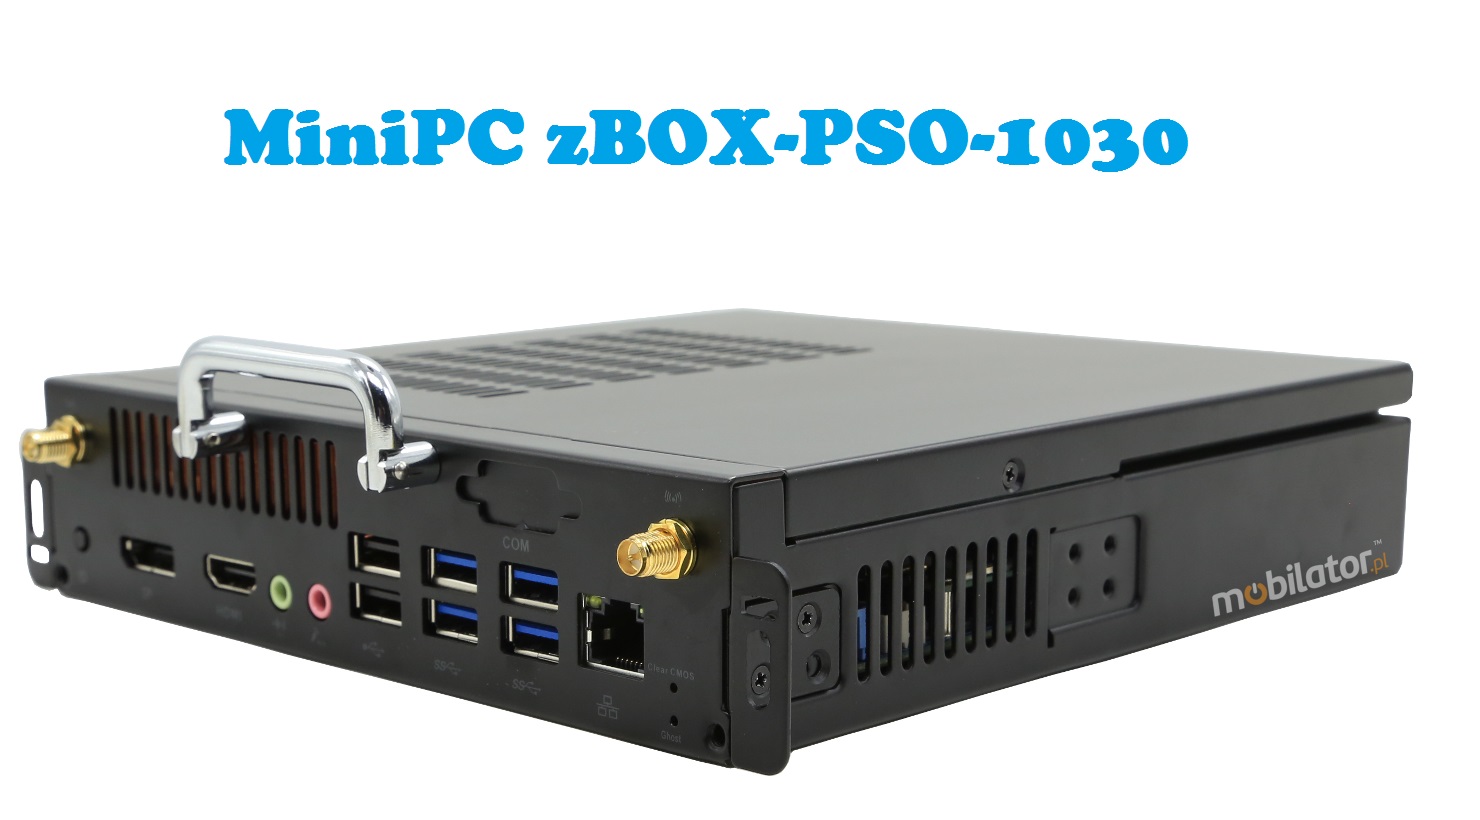 Efficient Industrial Computer with a dedicated graphics card Nvidia GT1030 MiniPC zBOX-PSO-i7